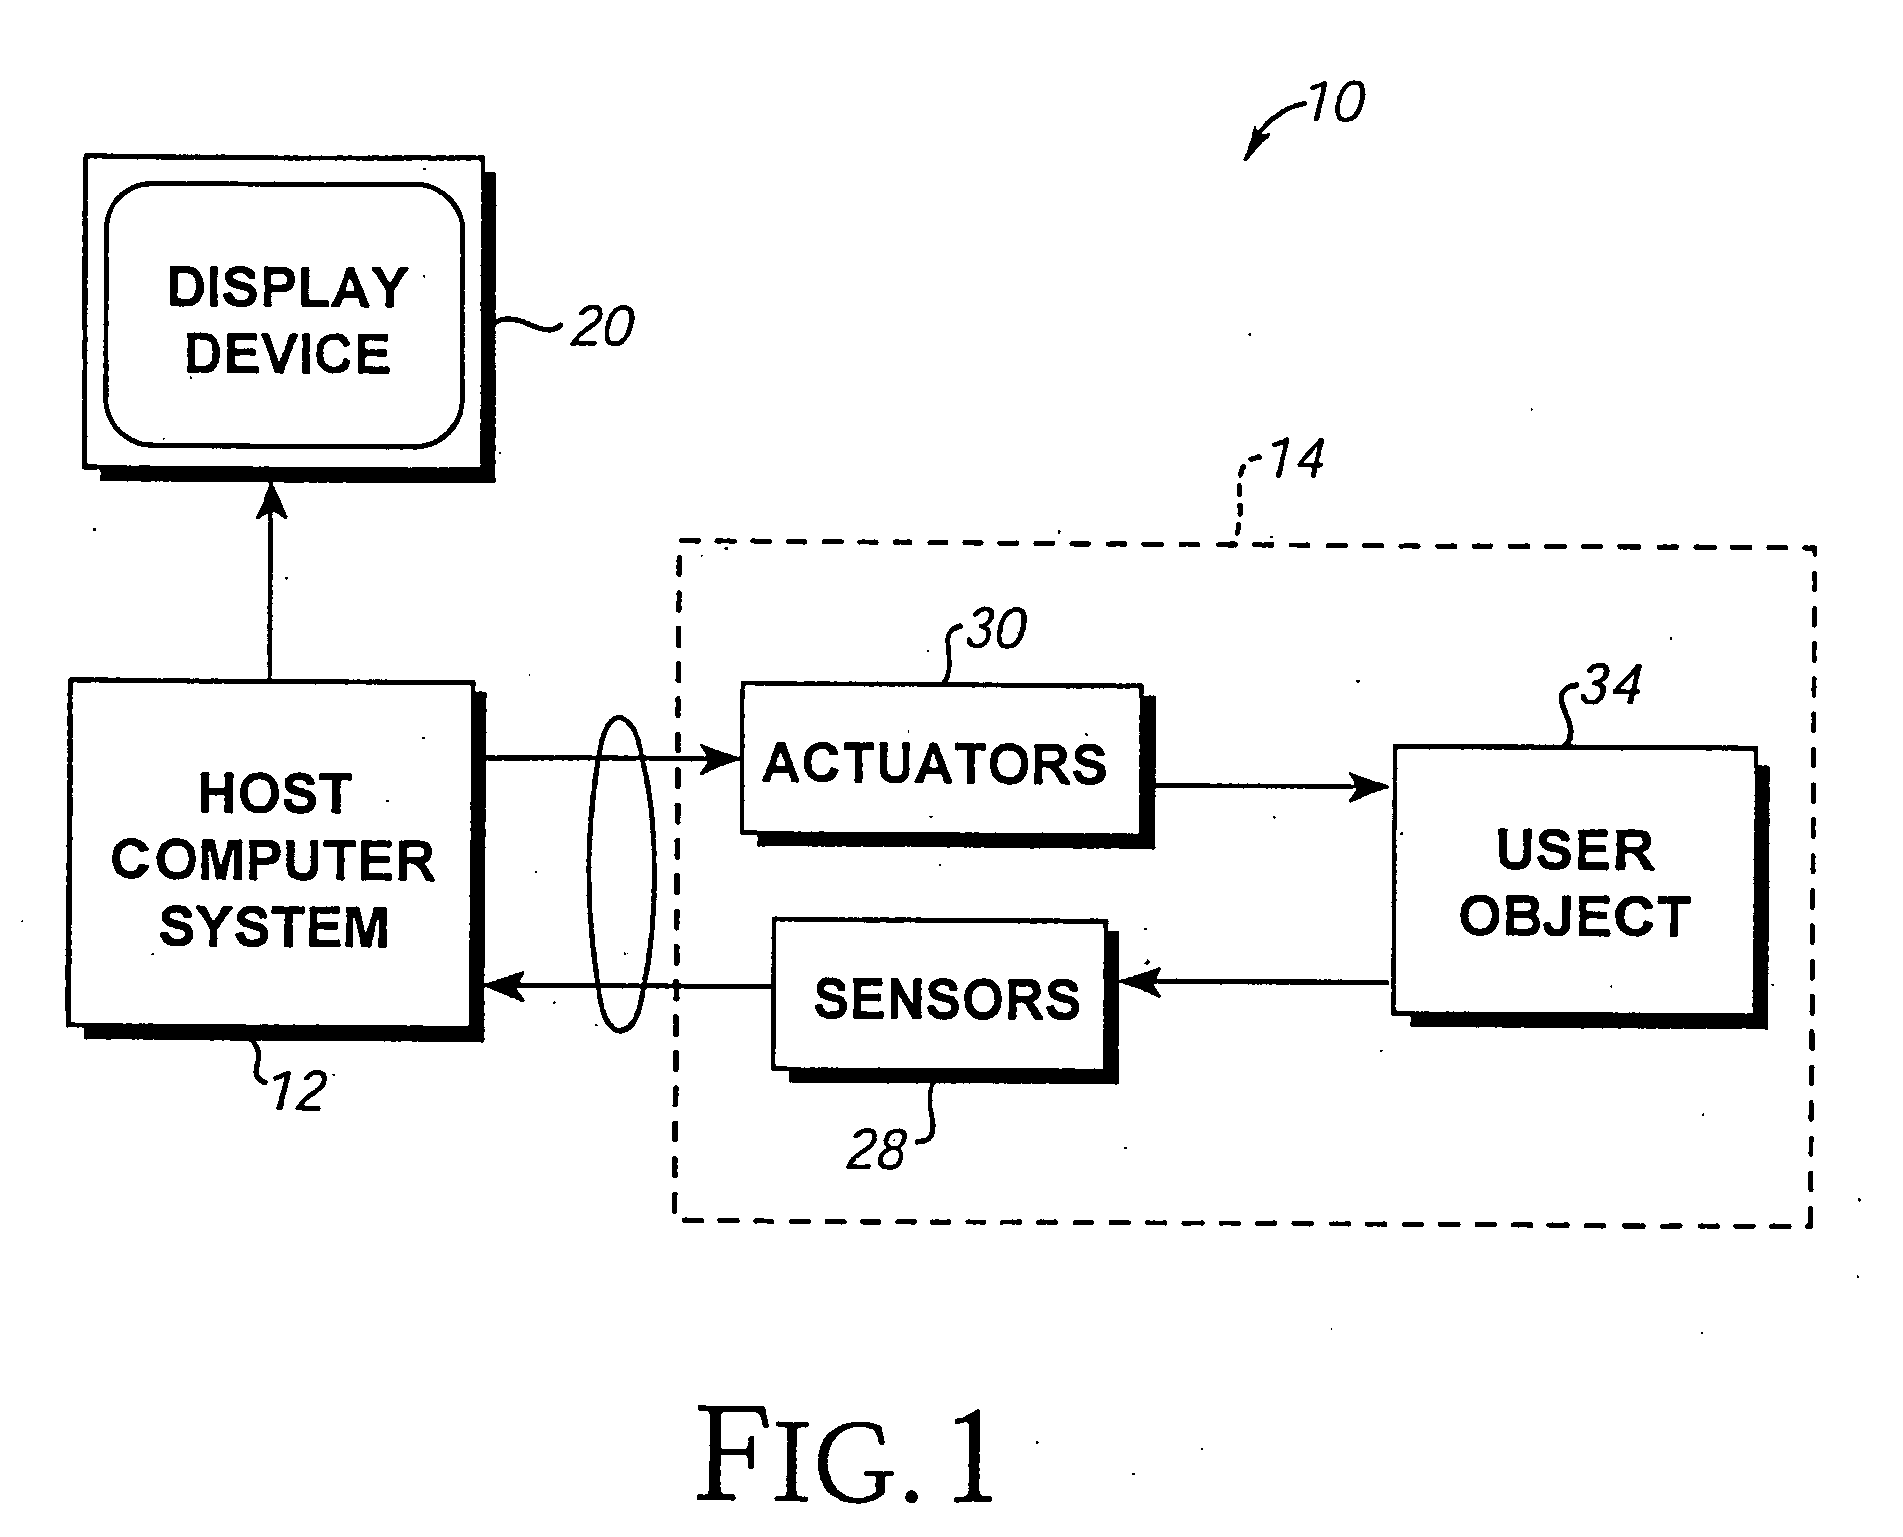 Force feedback device for simulating combat